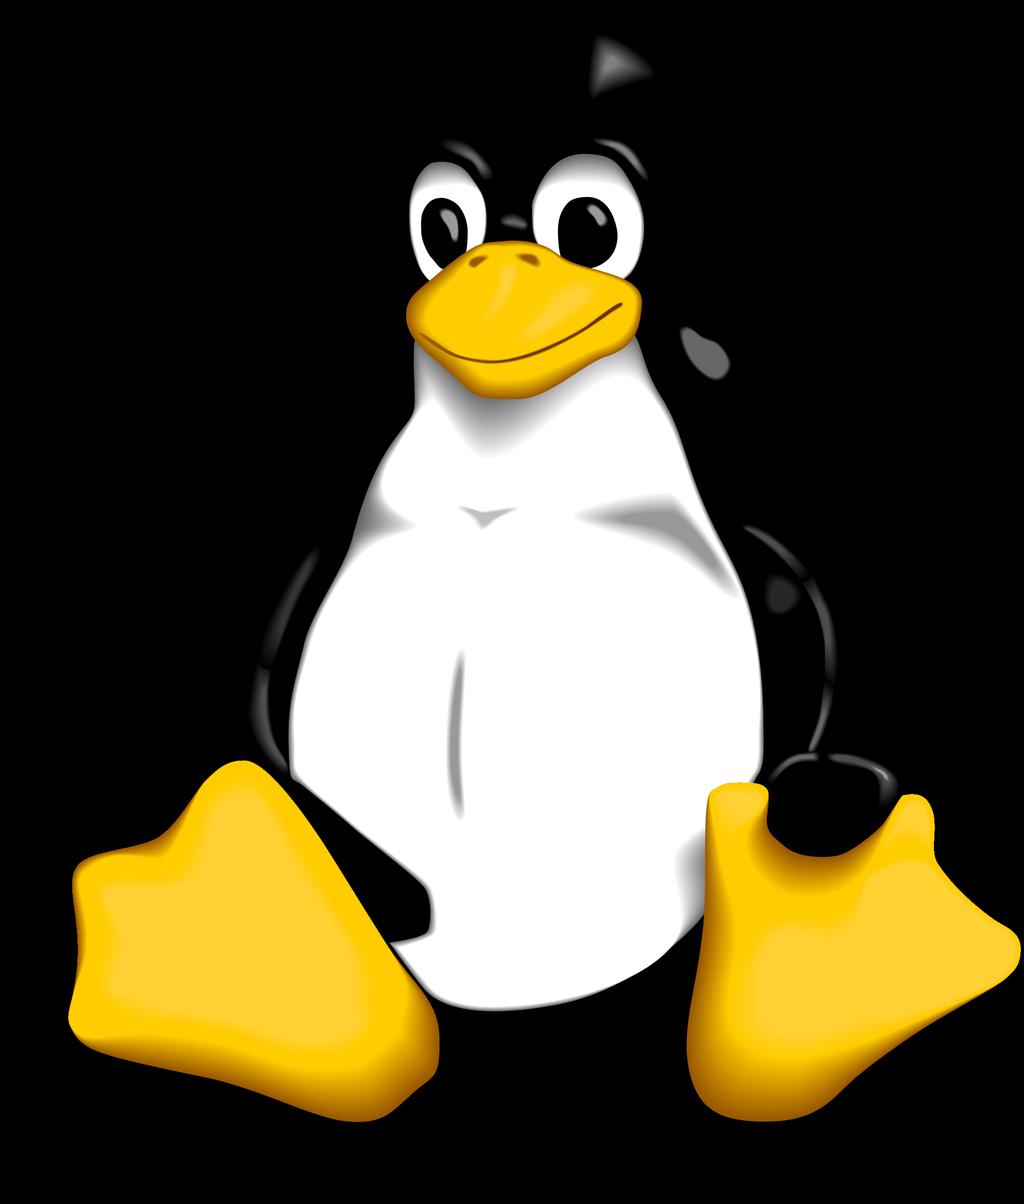 Upstream Kernel Client (LU-9679 ORNL) Kernel 4.14 updated to approximately Lustre 2.8, with some fixes from Lustre 2.9 Lustre 2.10 updated to work with kernel ~4.